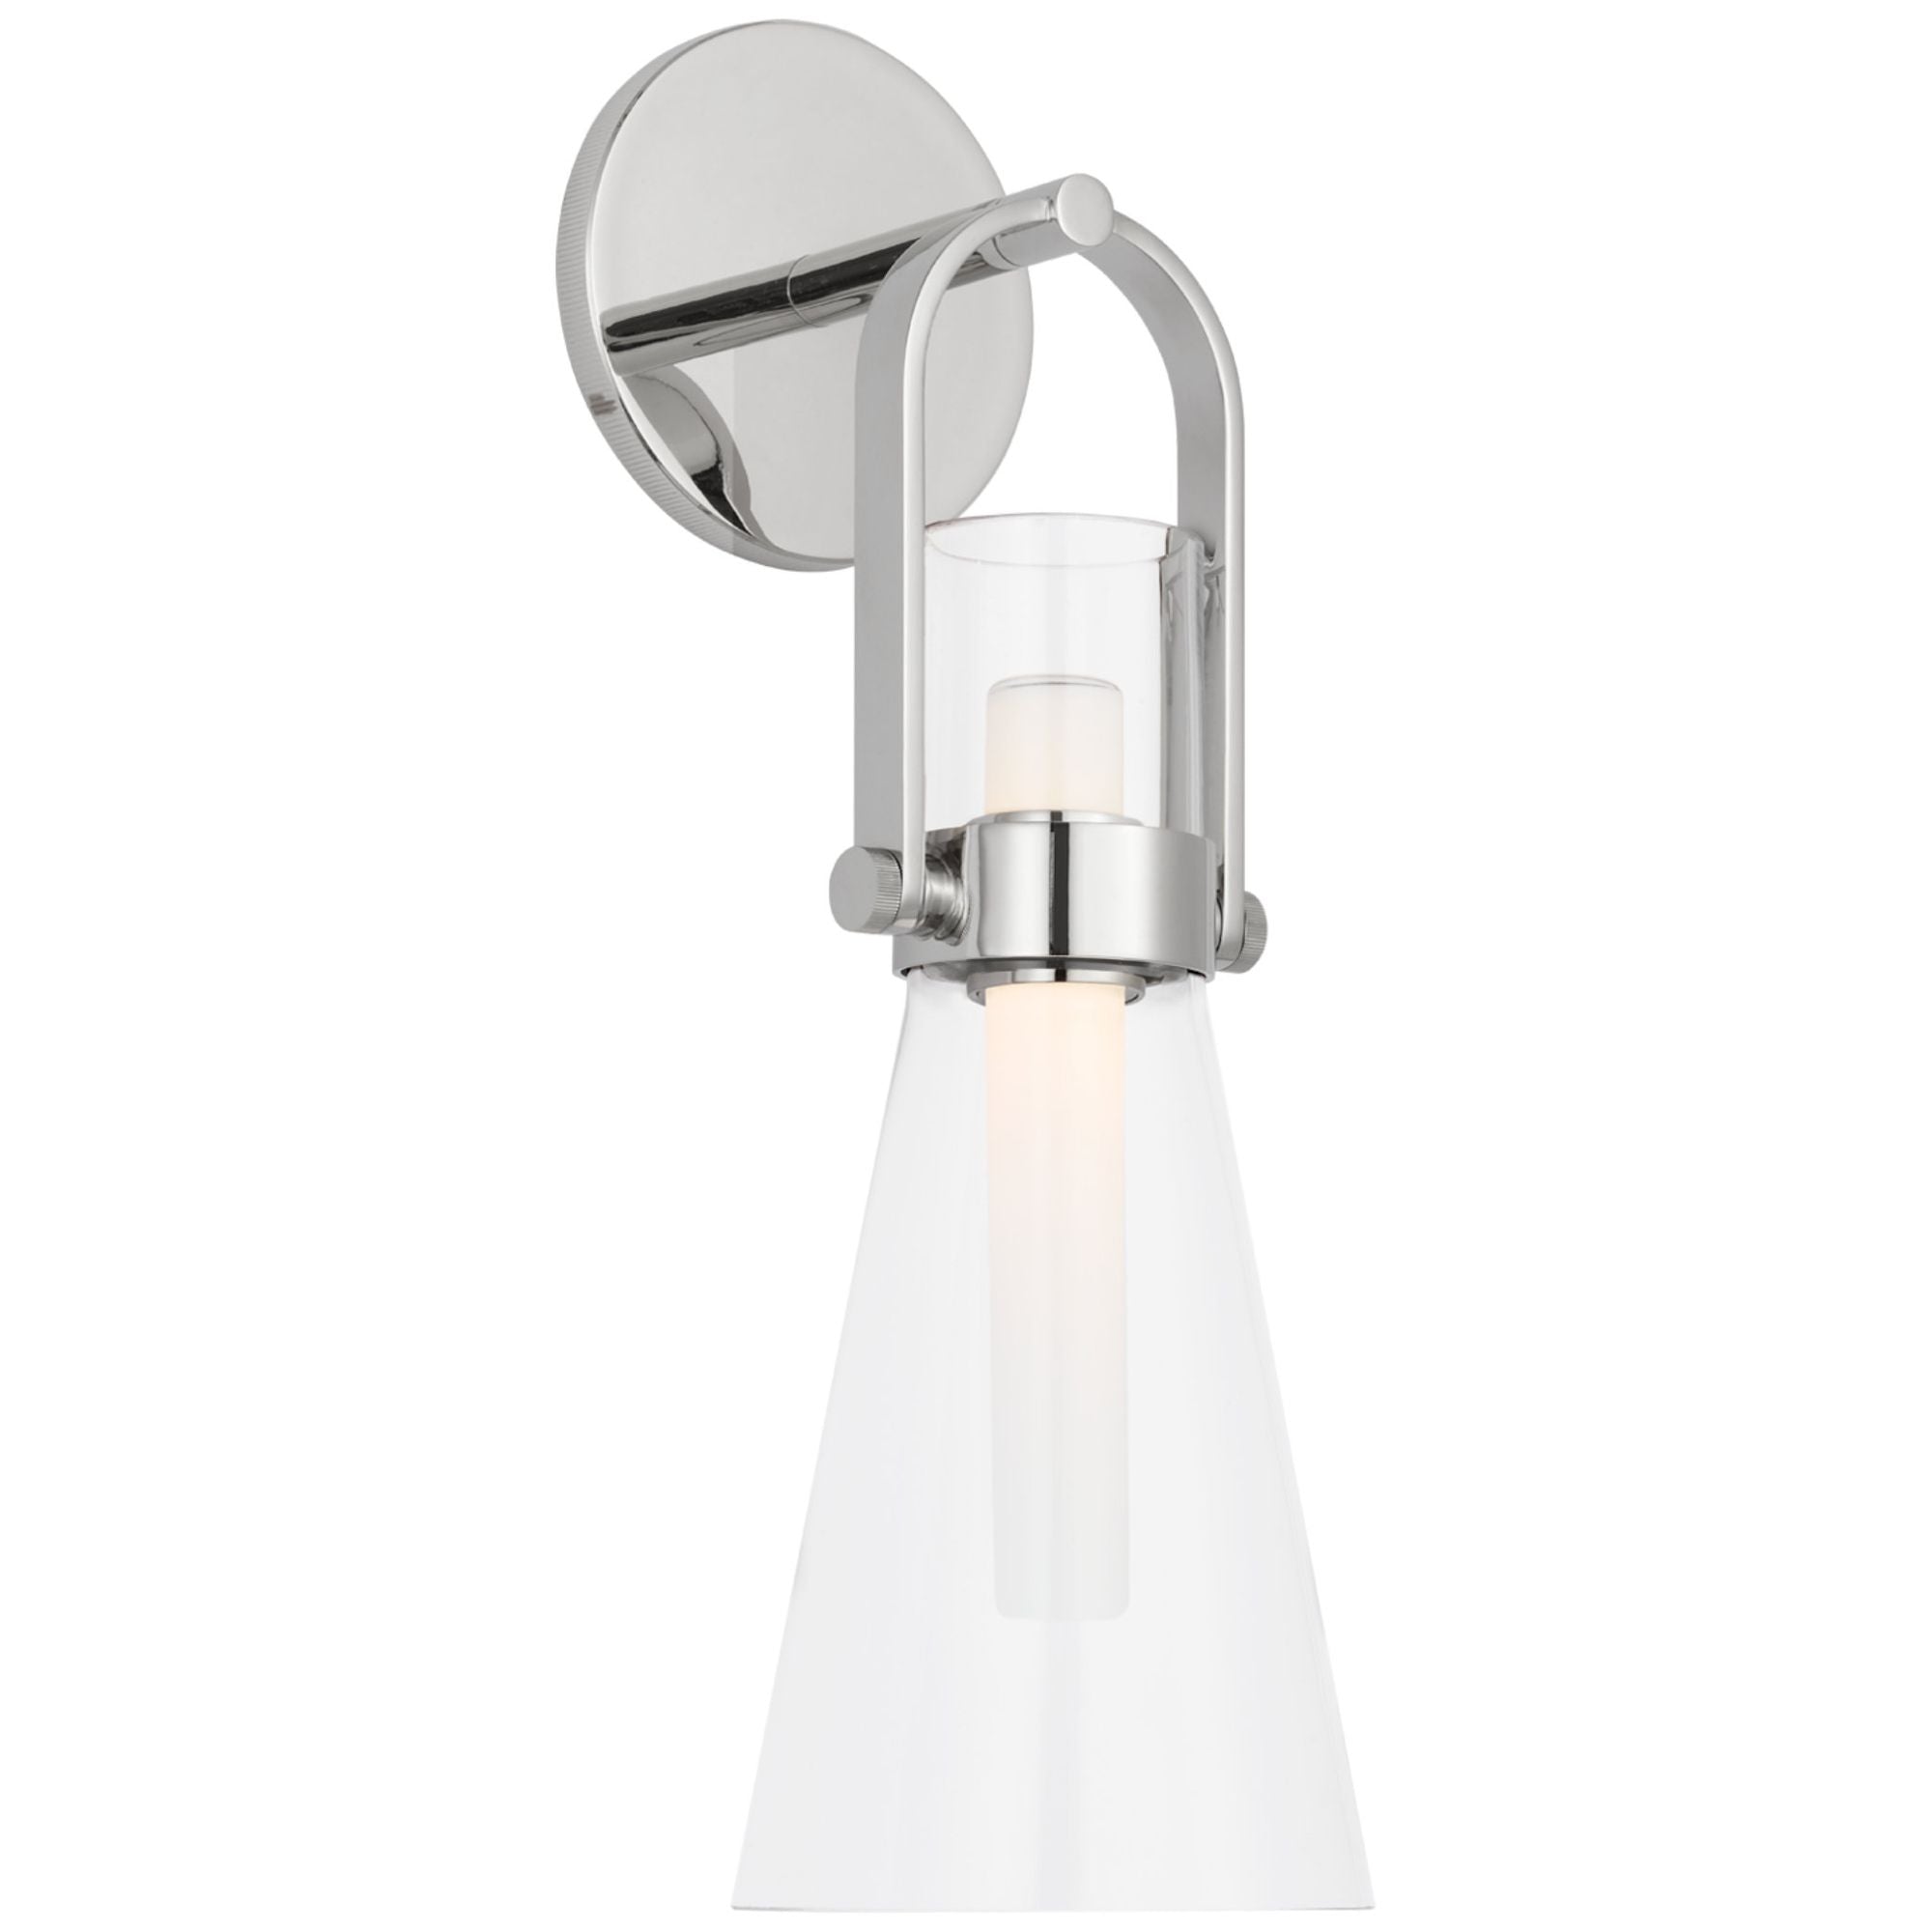 Ian K. Fowler Larkin Medium Conical Bracketed Sconce in Polished Nickel with Clear Glass